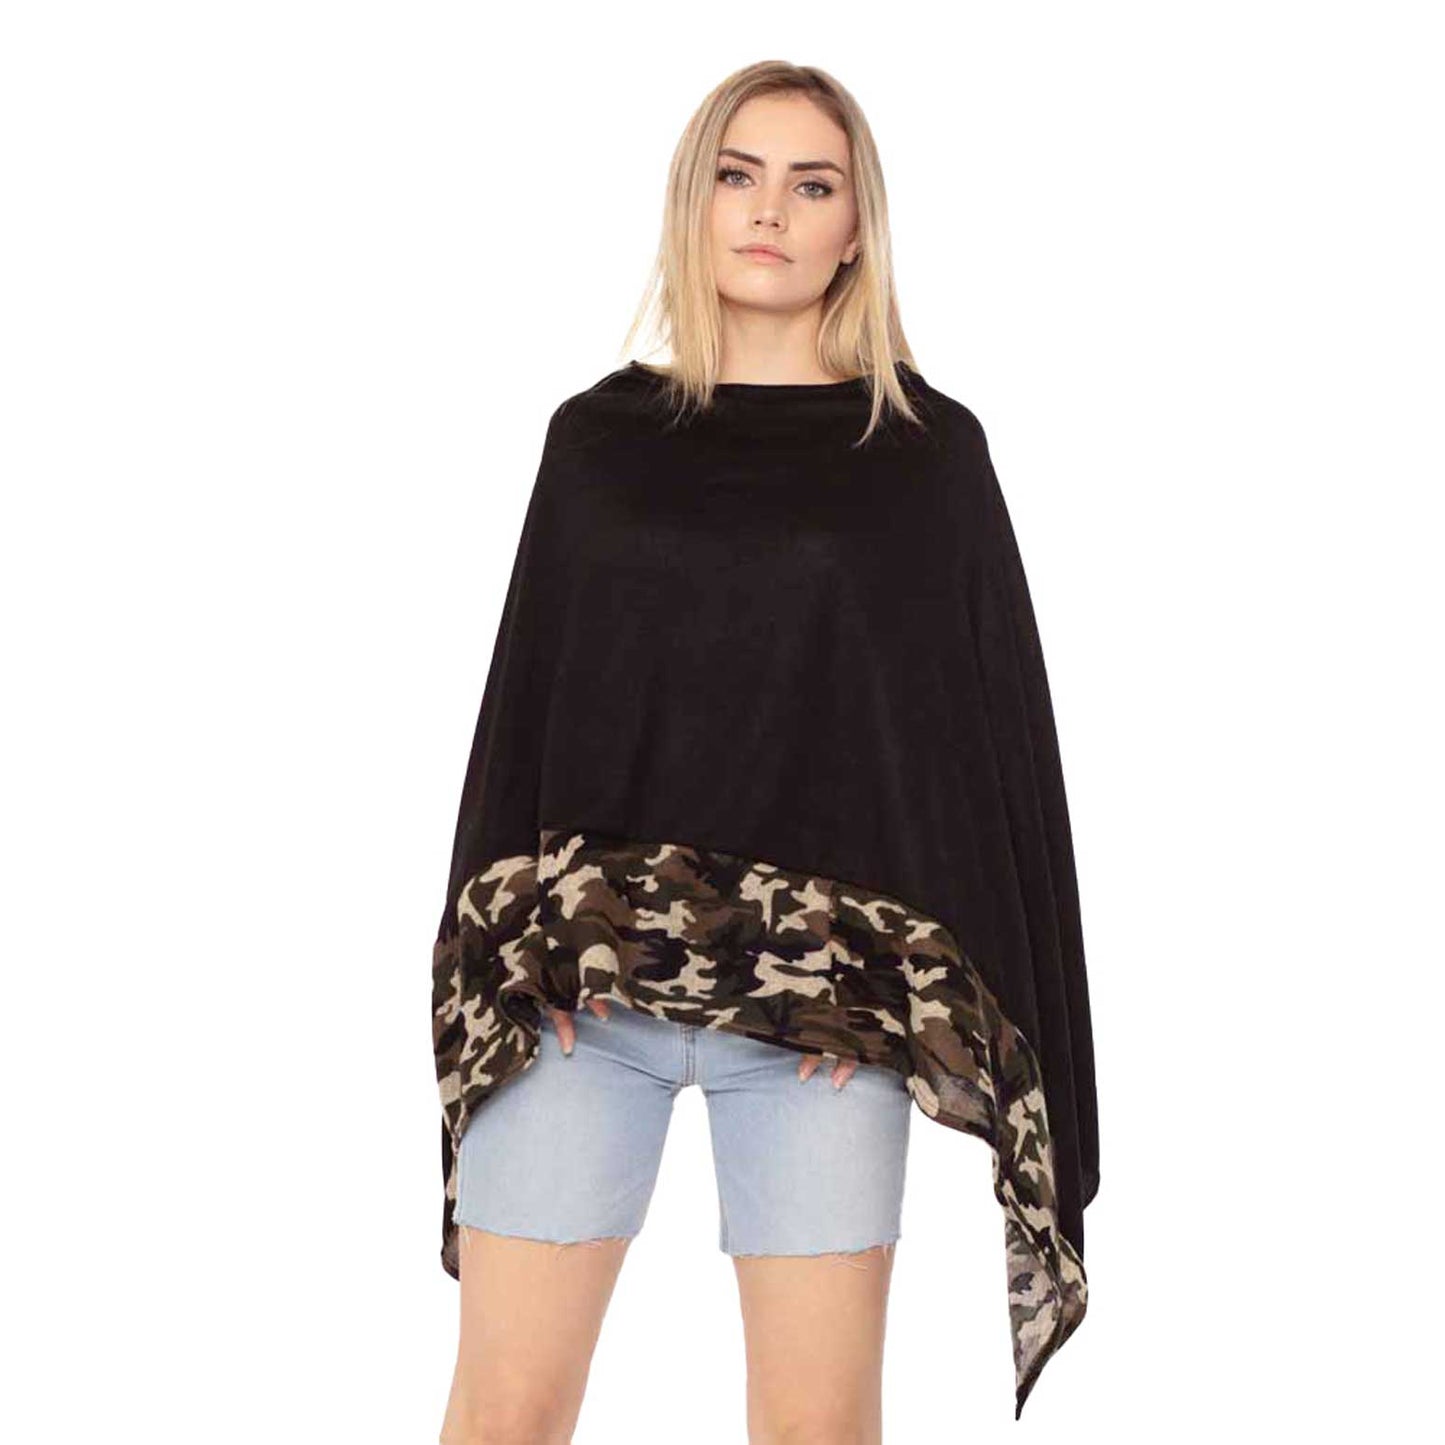 Black Camouflage Pattern Trim Poncho, This timeless trim Poncho is Soft, Lightweight and Breathable Fabric, Close to Skin, Comfortable to Wear. Sophisticated, flattering and cozy, this Poncho drapes beautifully for a relaxed, pulled-together look. Suitable for Weekend, Work, Holiday, Beach, Party, Club, Night, Evening, Date, Casual and Other Occasions in Spring, Summer and Autumn.